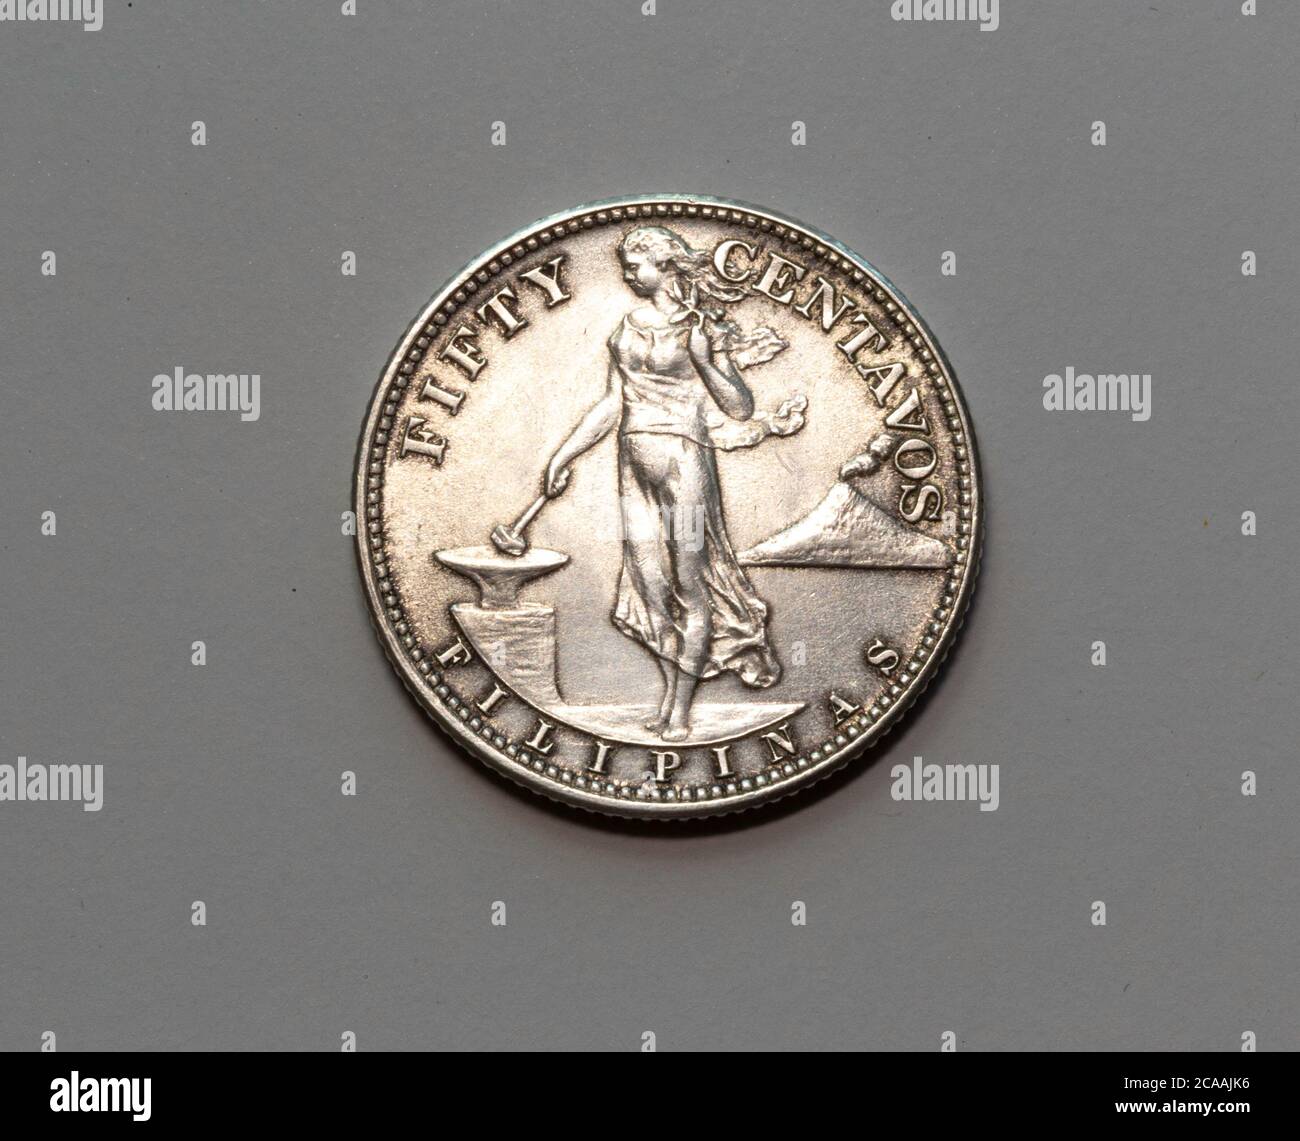 50 Centavos Coin Minted in the United States,  1944, PHILIPPINES UNDER U.S. SOVEREIGNTY Stock Photo